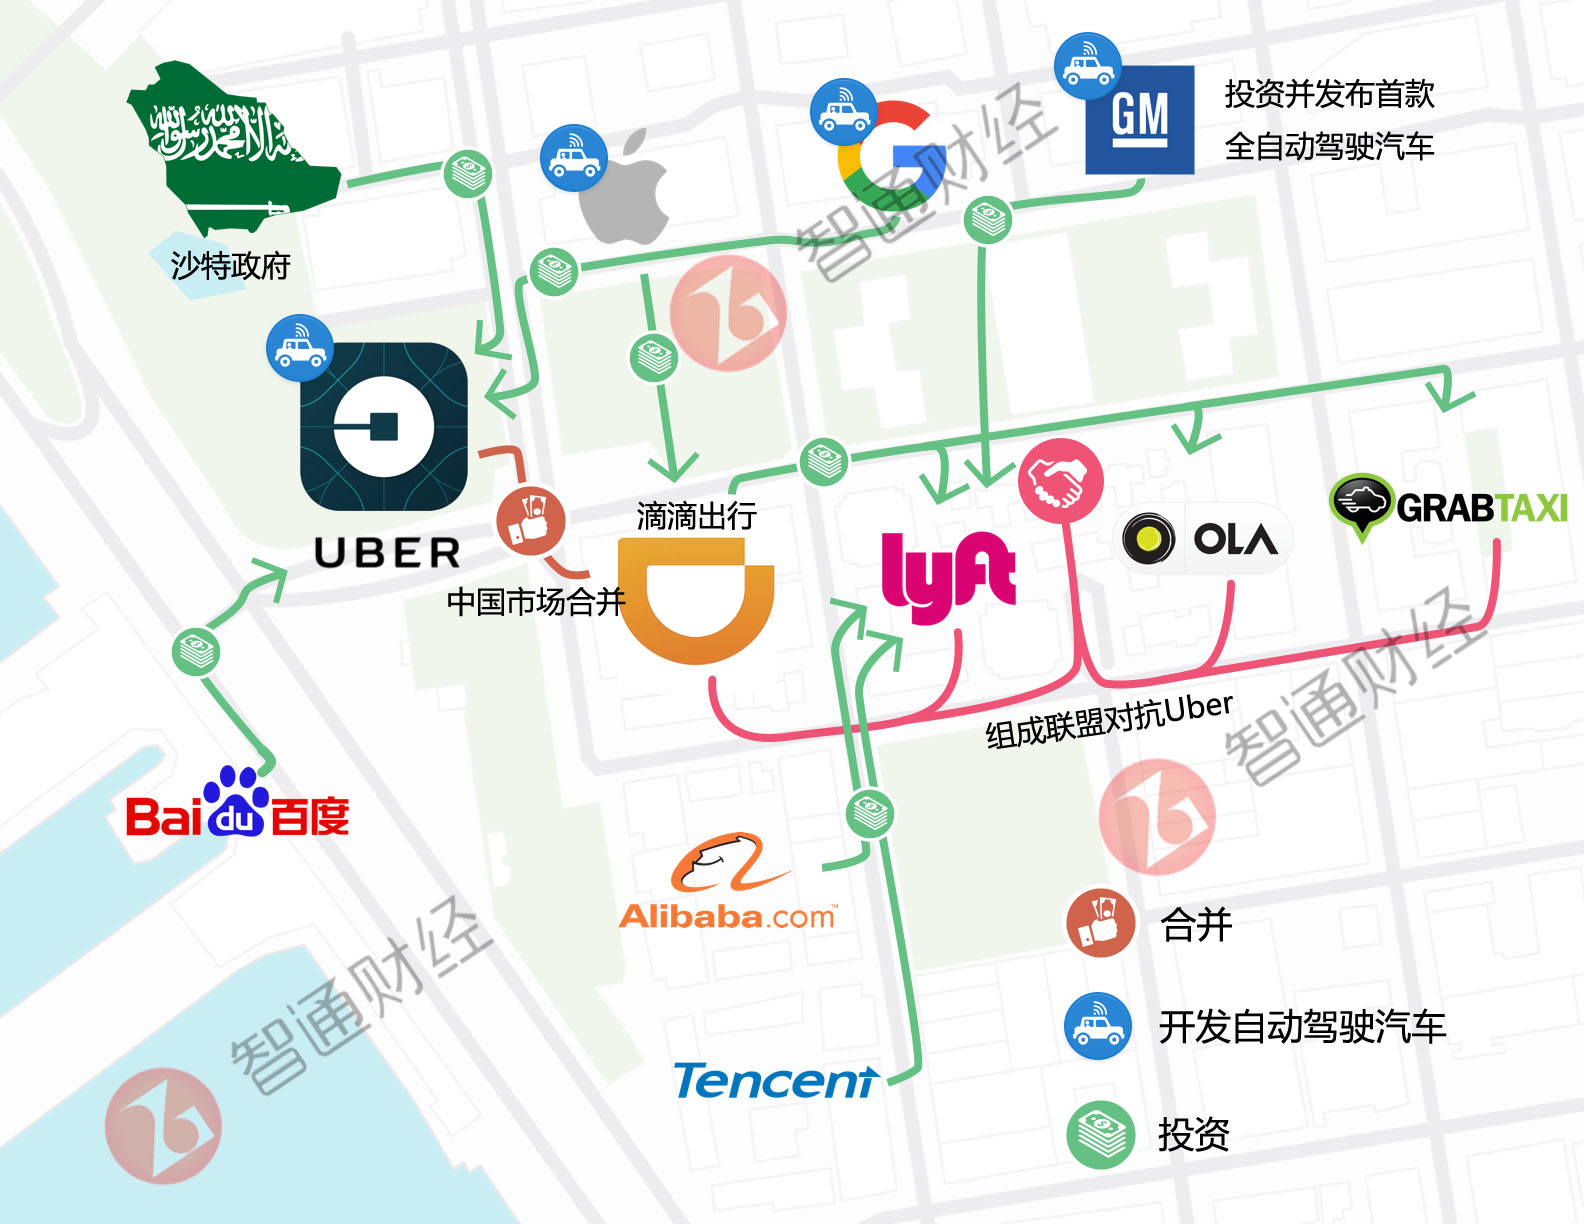 A-Visual-Guide-To-The-Twisted-Web-Created-By-The-Uber-Didi-Merger.jpg